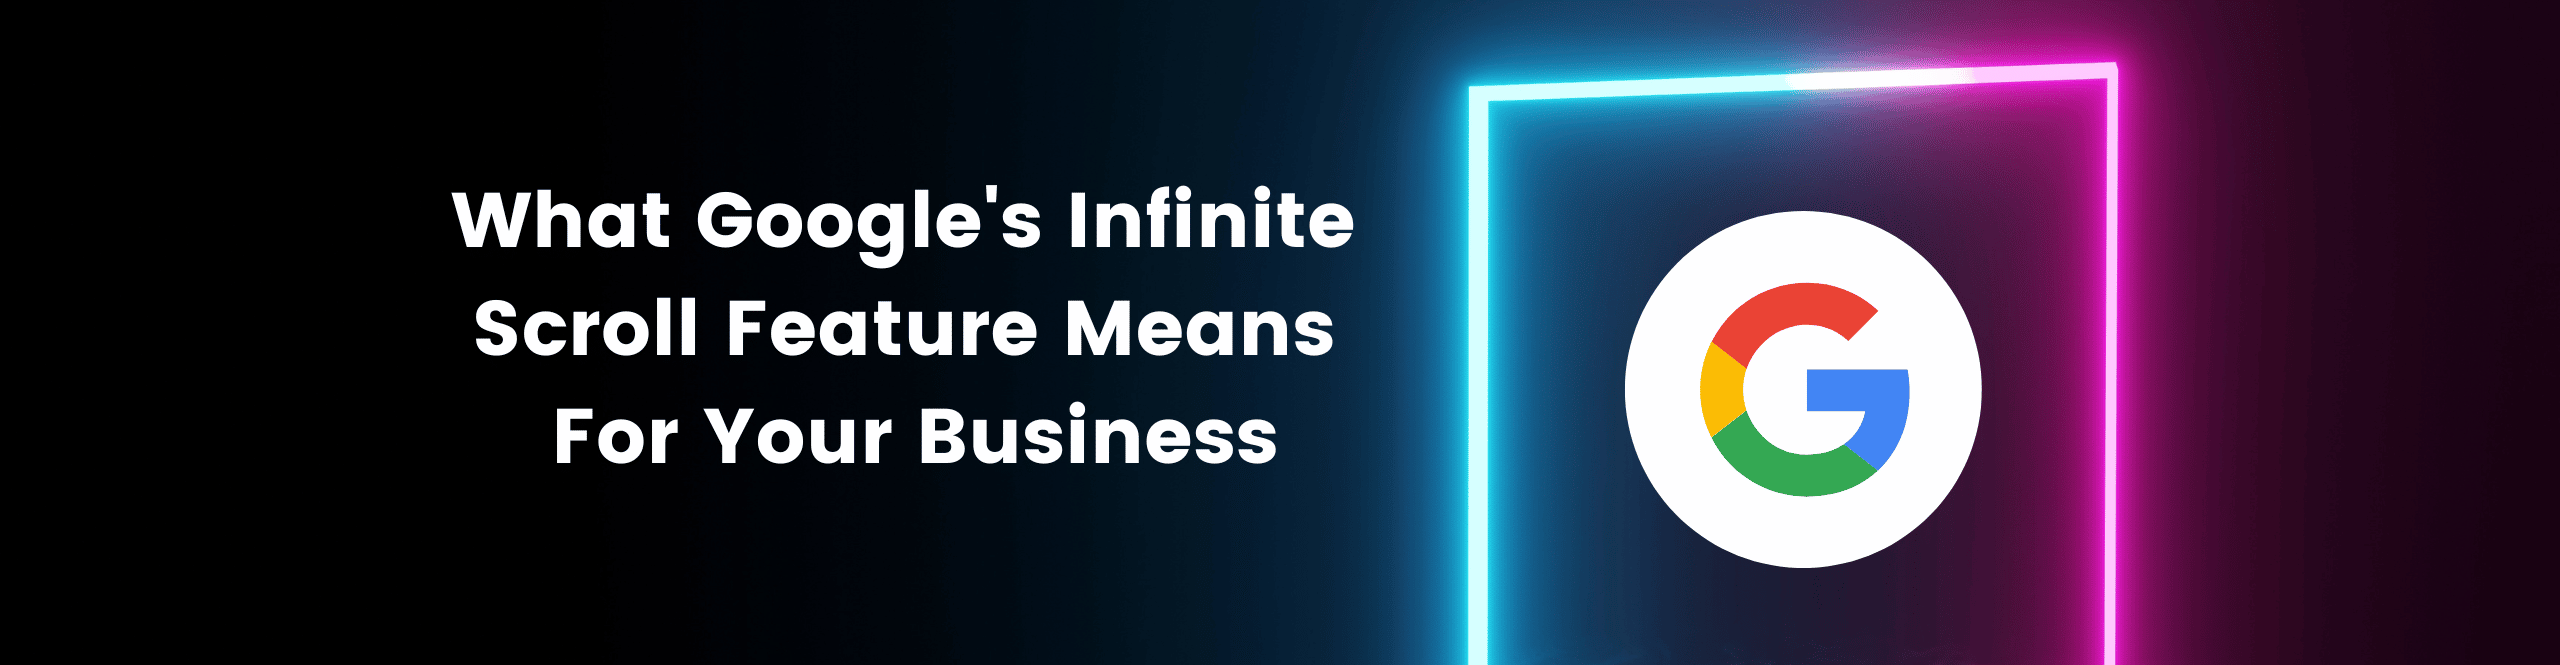 Google’s Infinite Scroll Feature and What it Means for Your Business